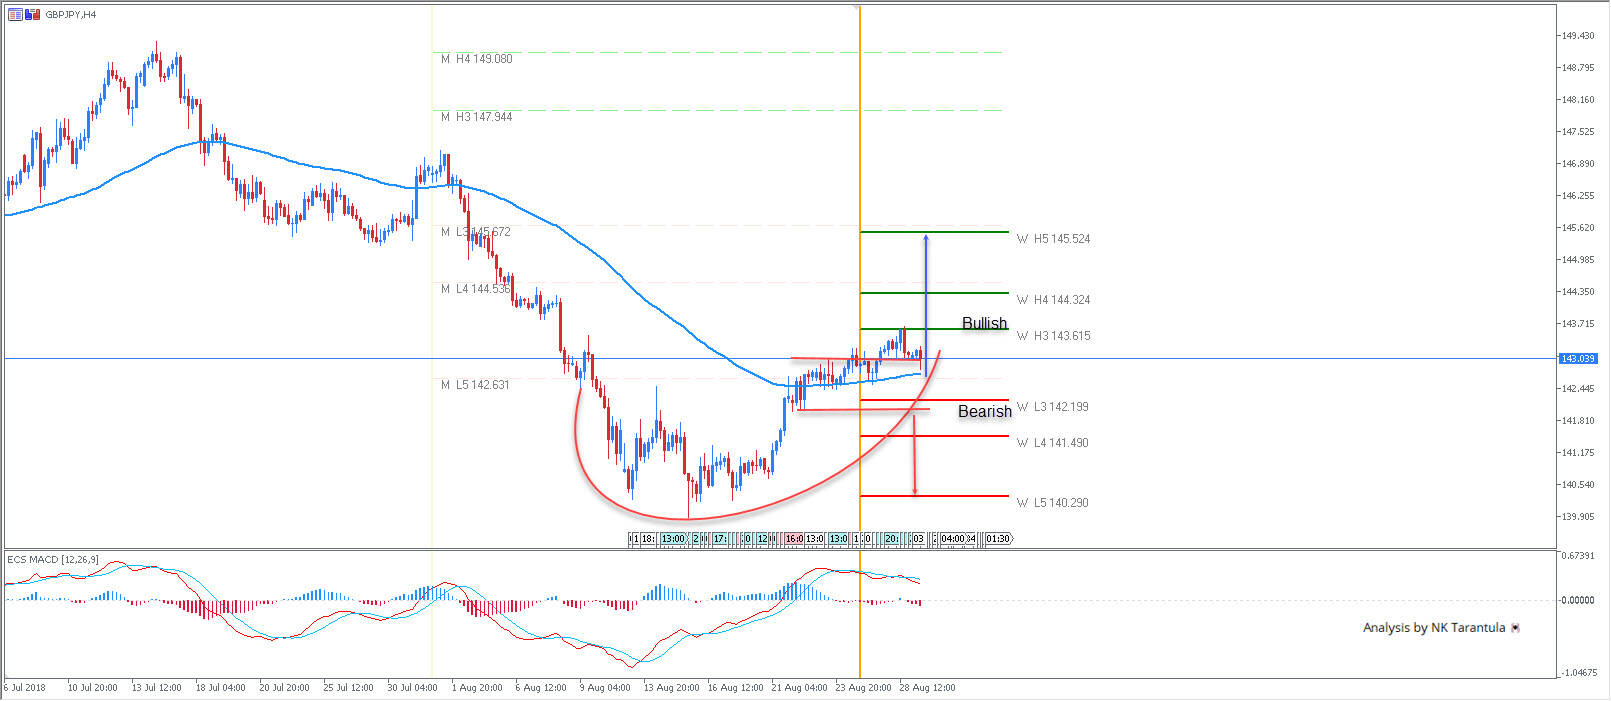 GBP/JPY Cup with Handle Pattern on H4 Time Frame